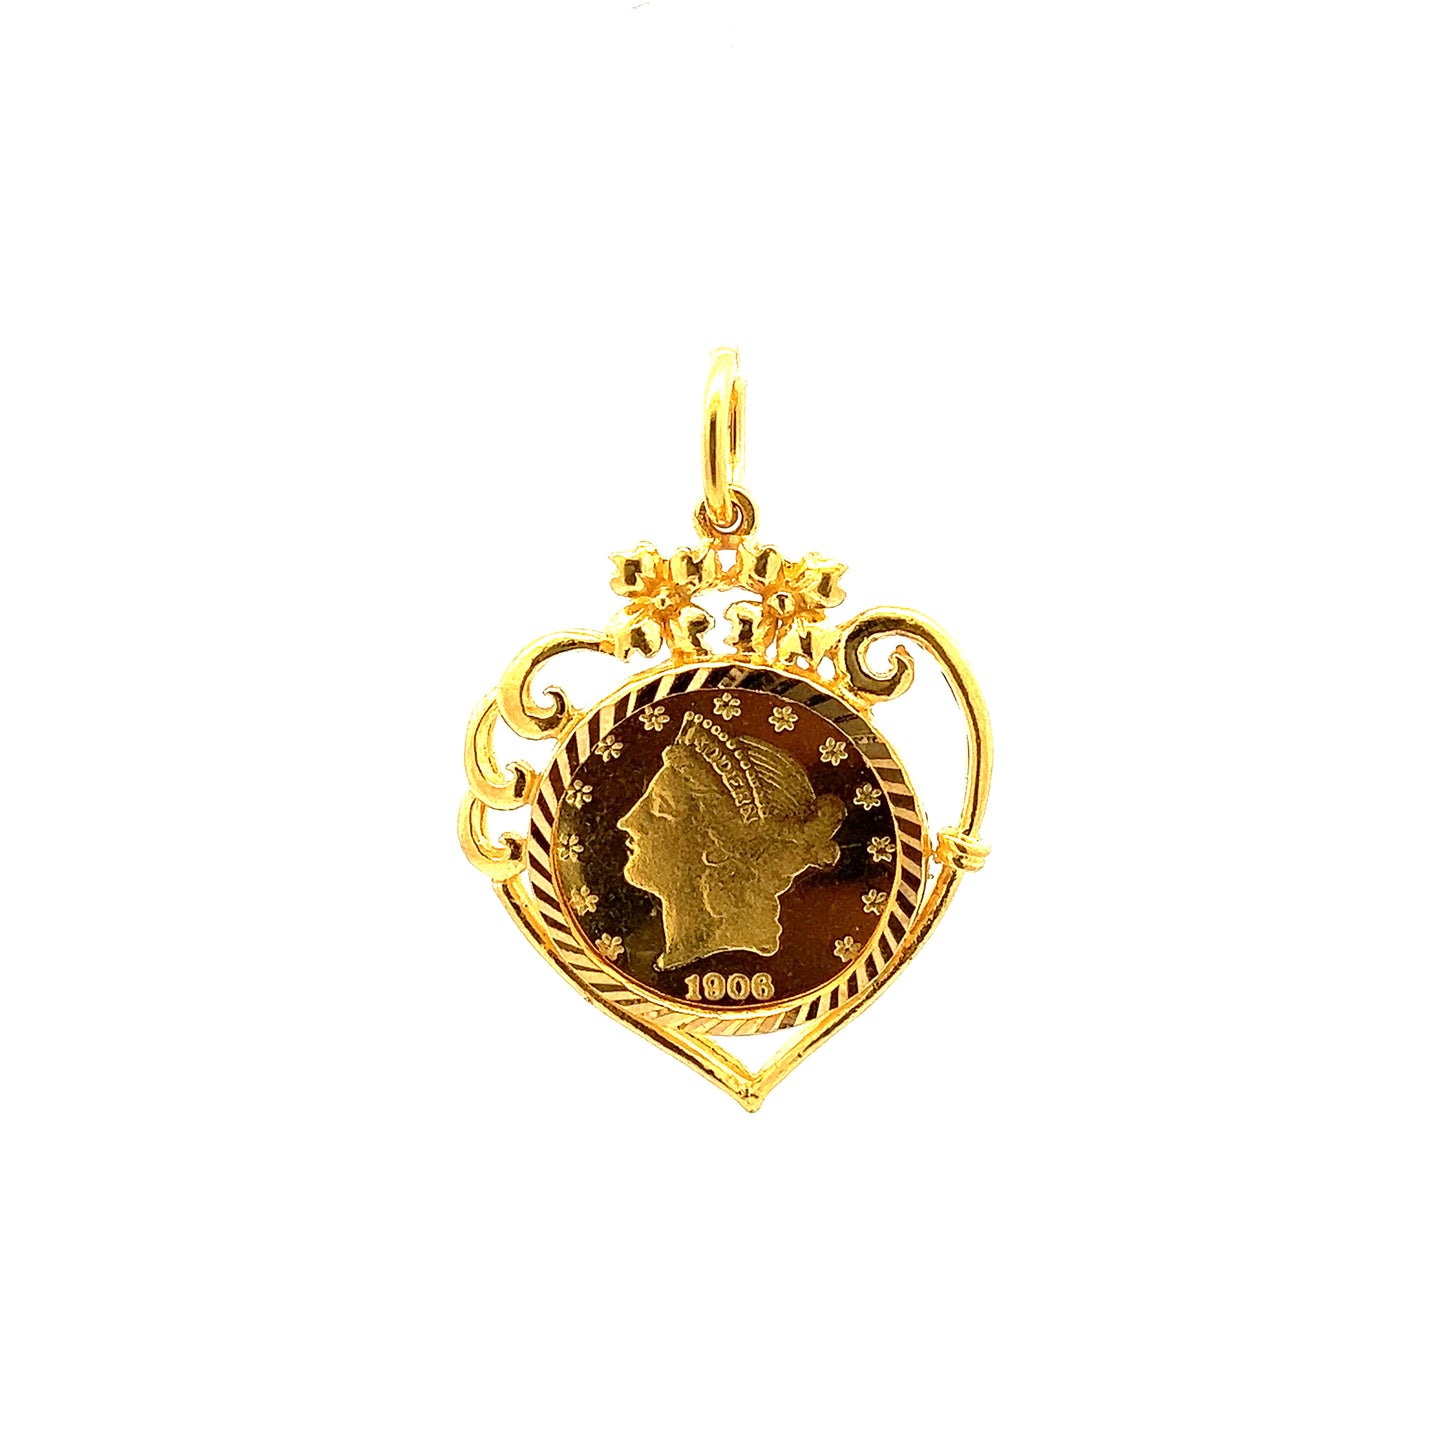 GOLD PENDANT ( 22K ) ( 6.17g ) - 0014811 Chain sold separately